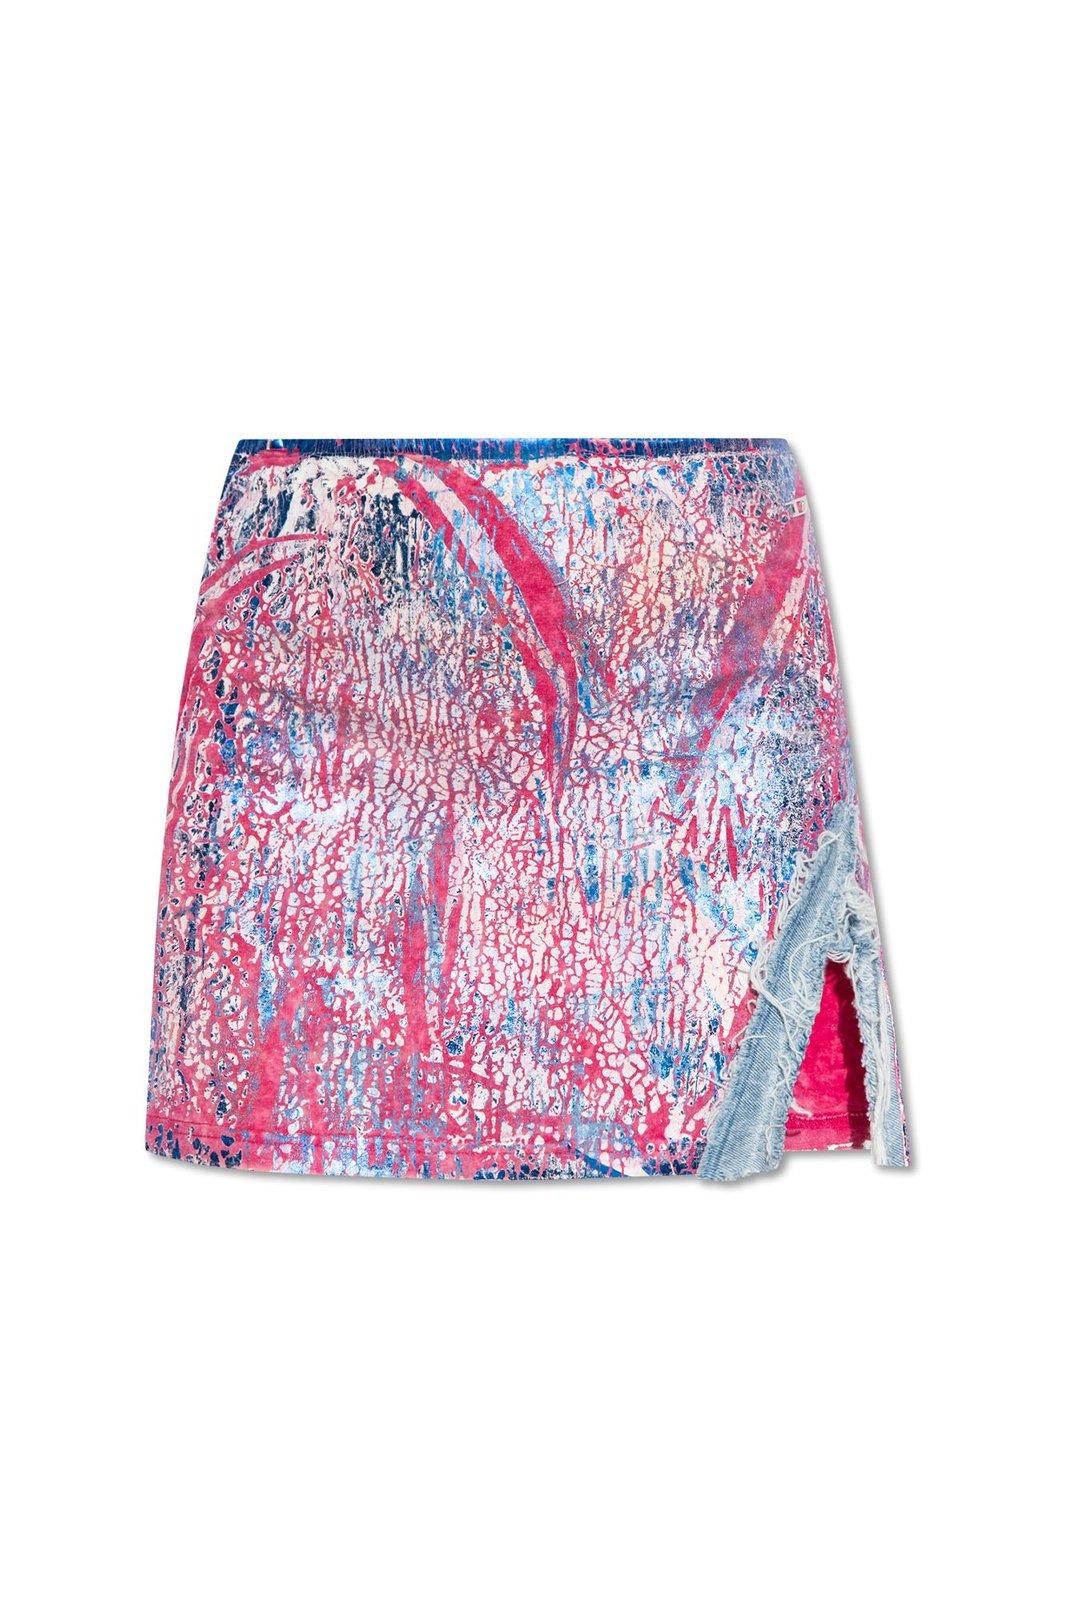 Abstract Printed Distressed Mini Skirt